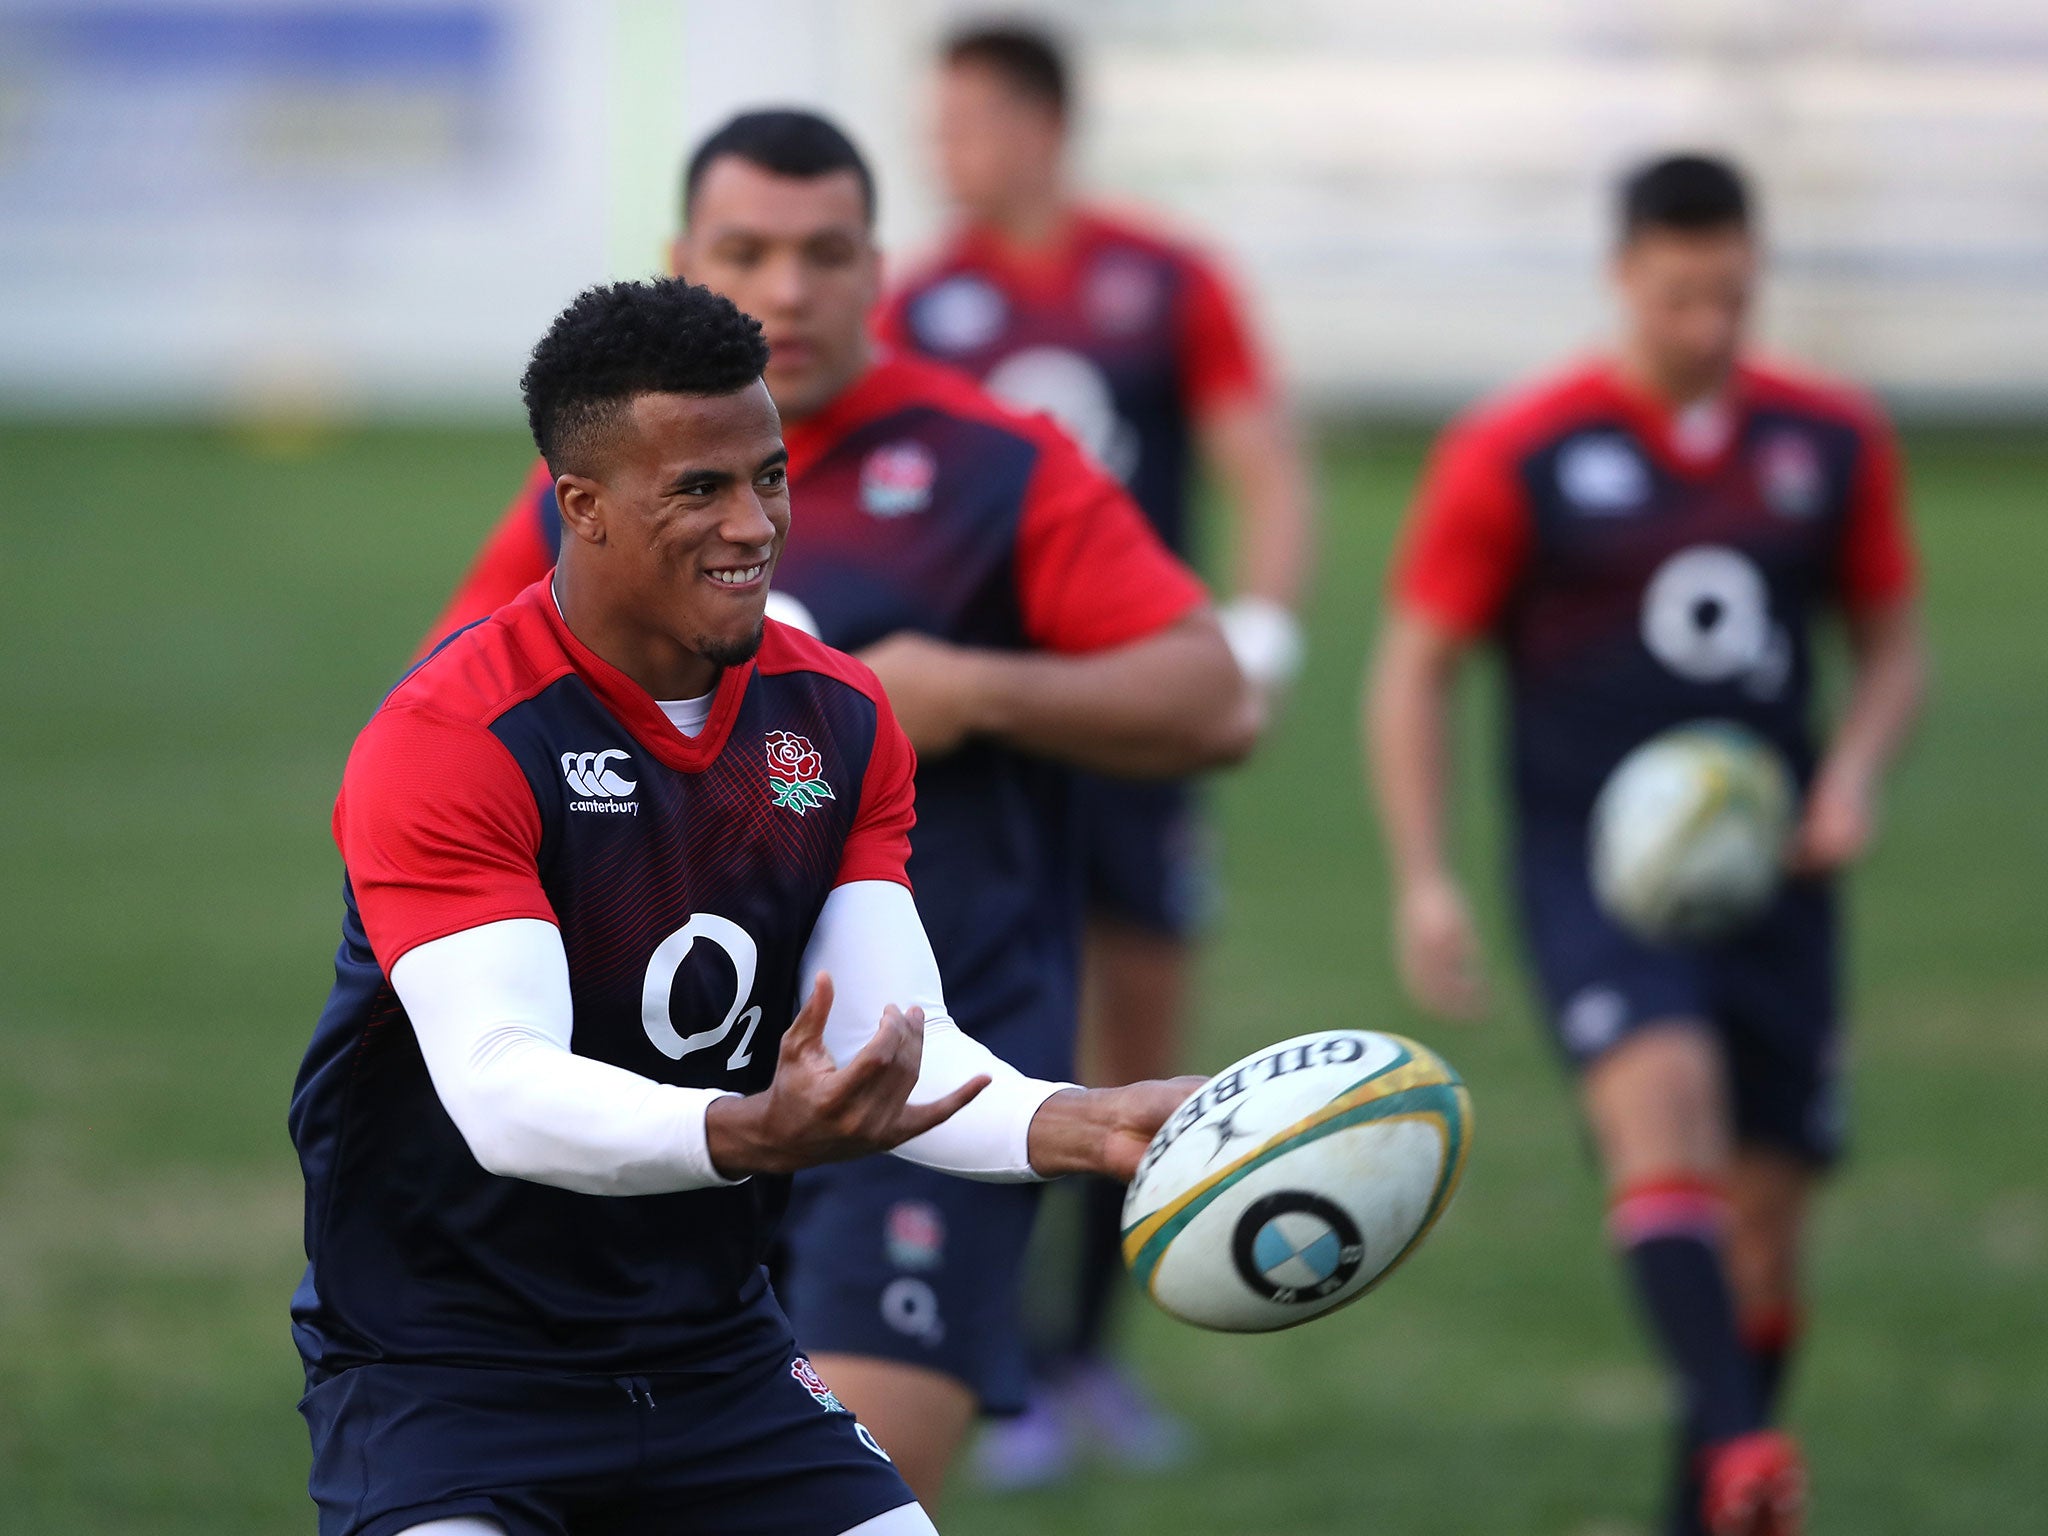 Watson is another England player currently sidelined with injury